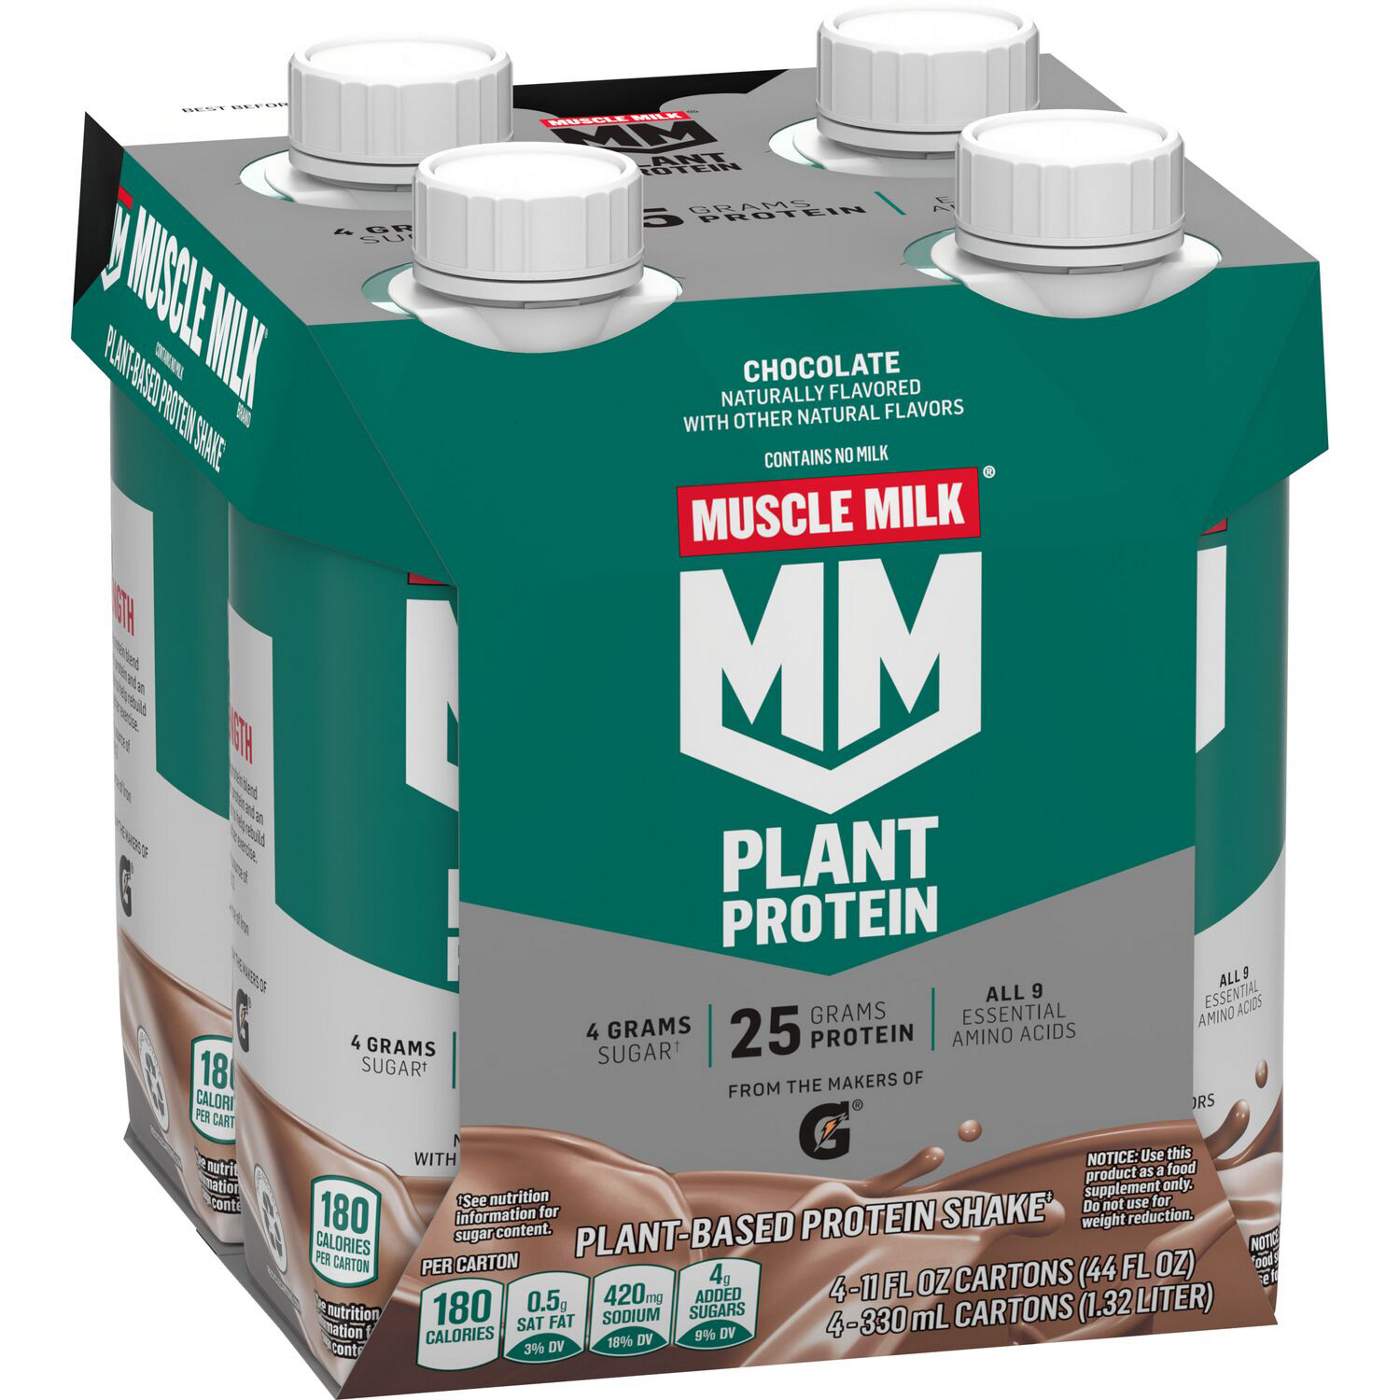 MUSCLE MILK Plant Protein Shake 4 pk Chocolate; image 3 of 3